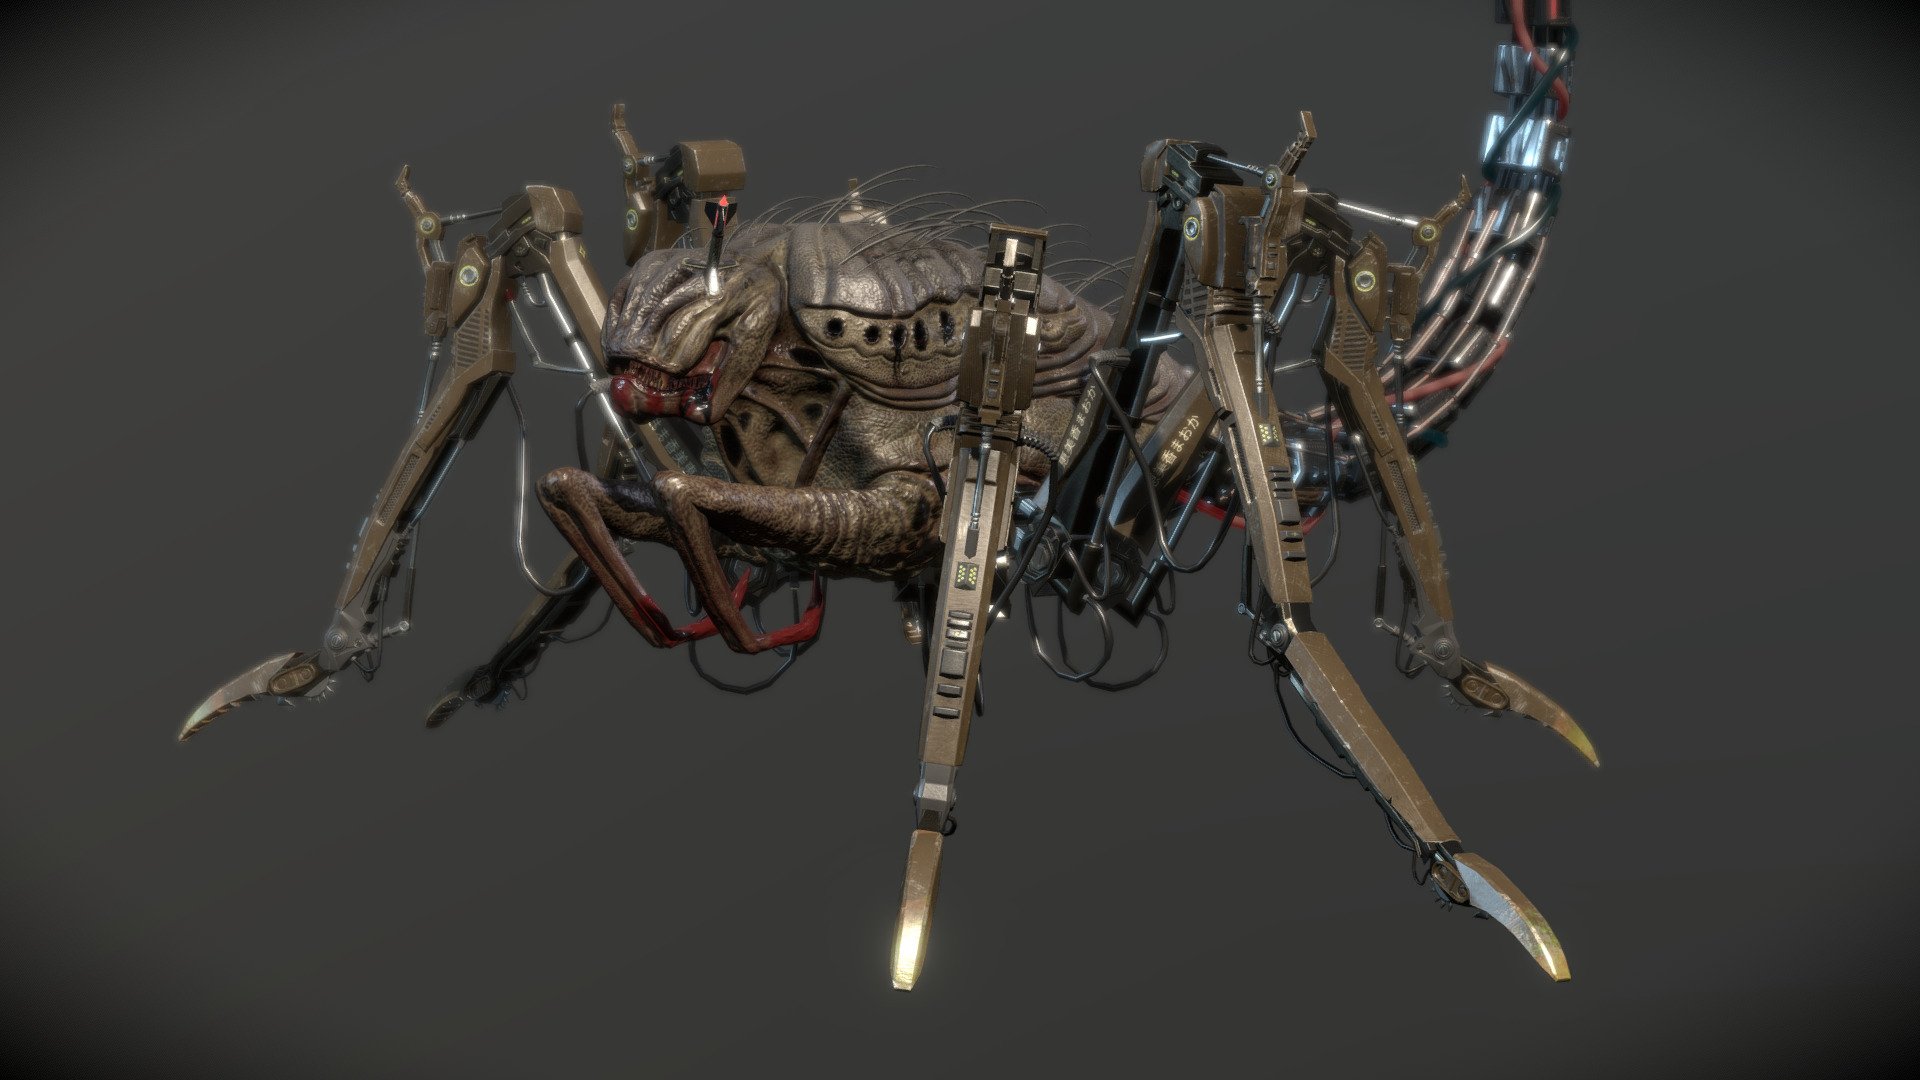 Model presented on environment:
https://www.artstation.com/artwork/zPXqPL

FREE IF CAN ANIMATE IT

Same model but attacking a human (nsfw)
https://sketchfab.com/3d-models/griever-from-maze-runner-657ba1d0be6c4966b38ef20132ae9e54

This is a detailed take of &ldquo;The Griever